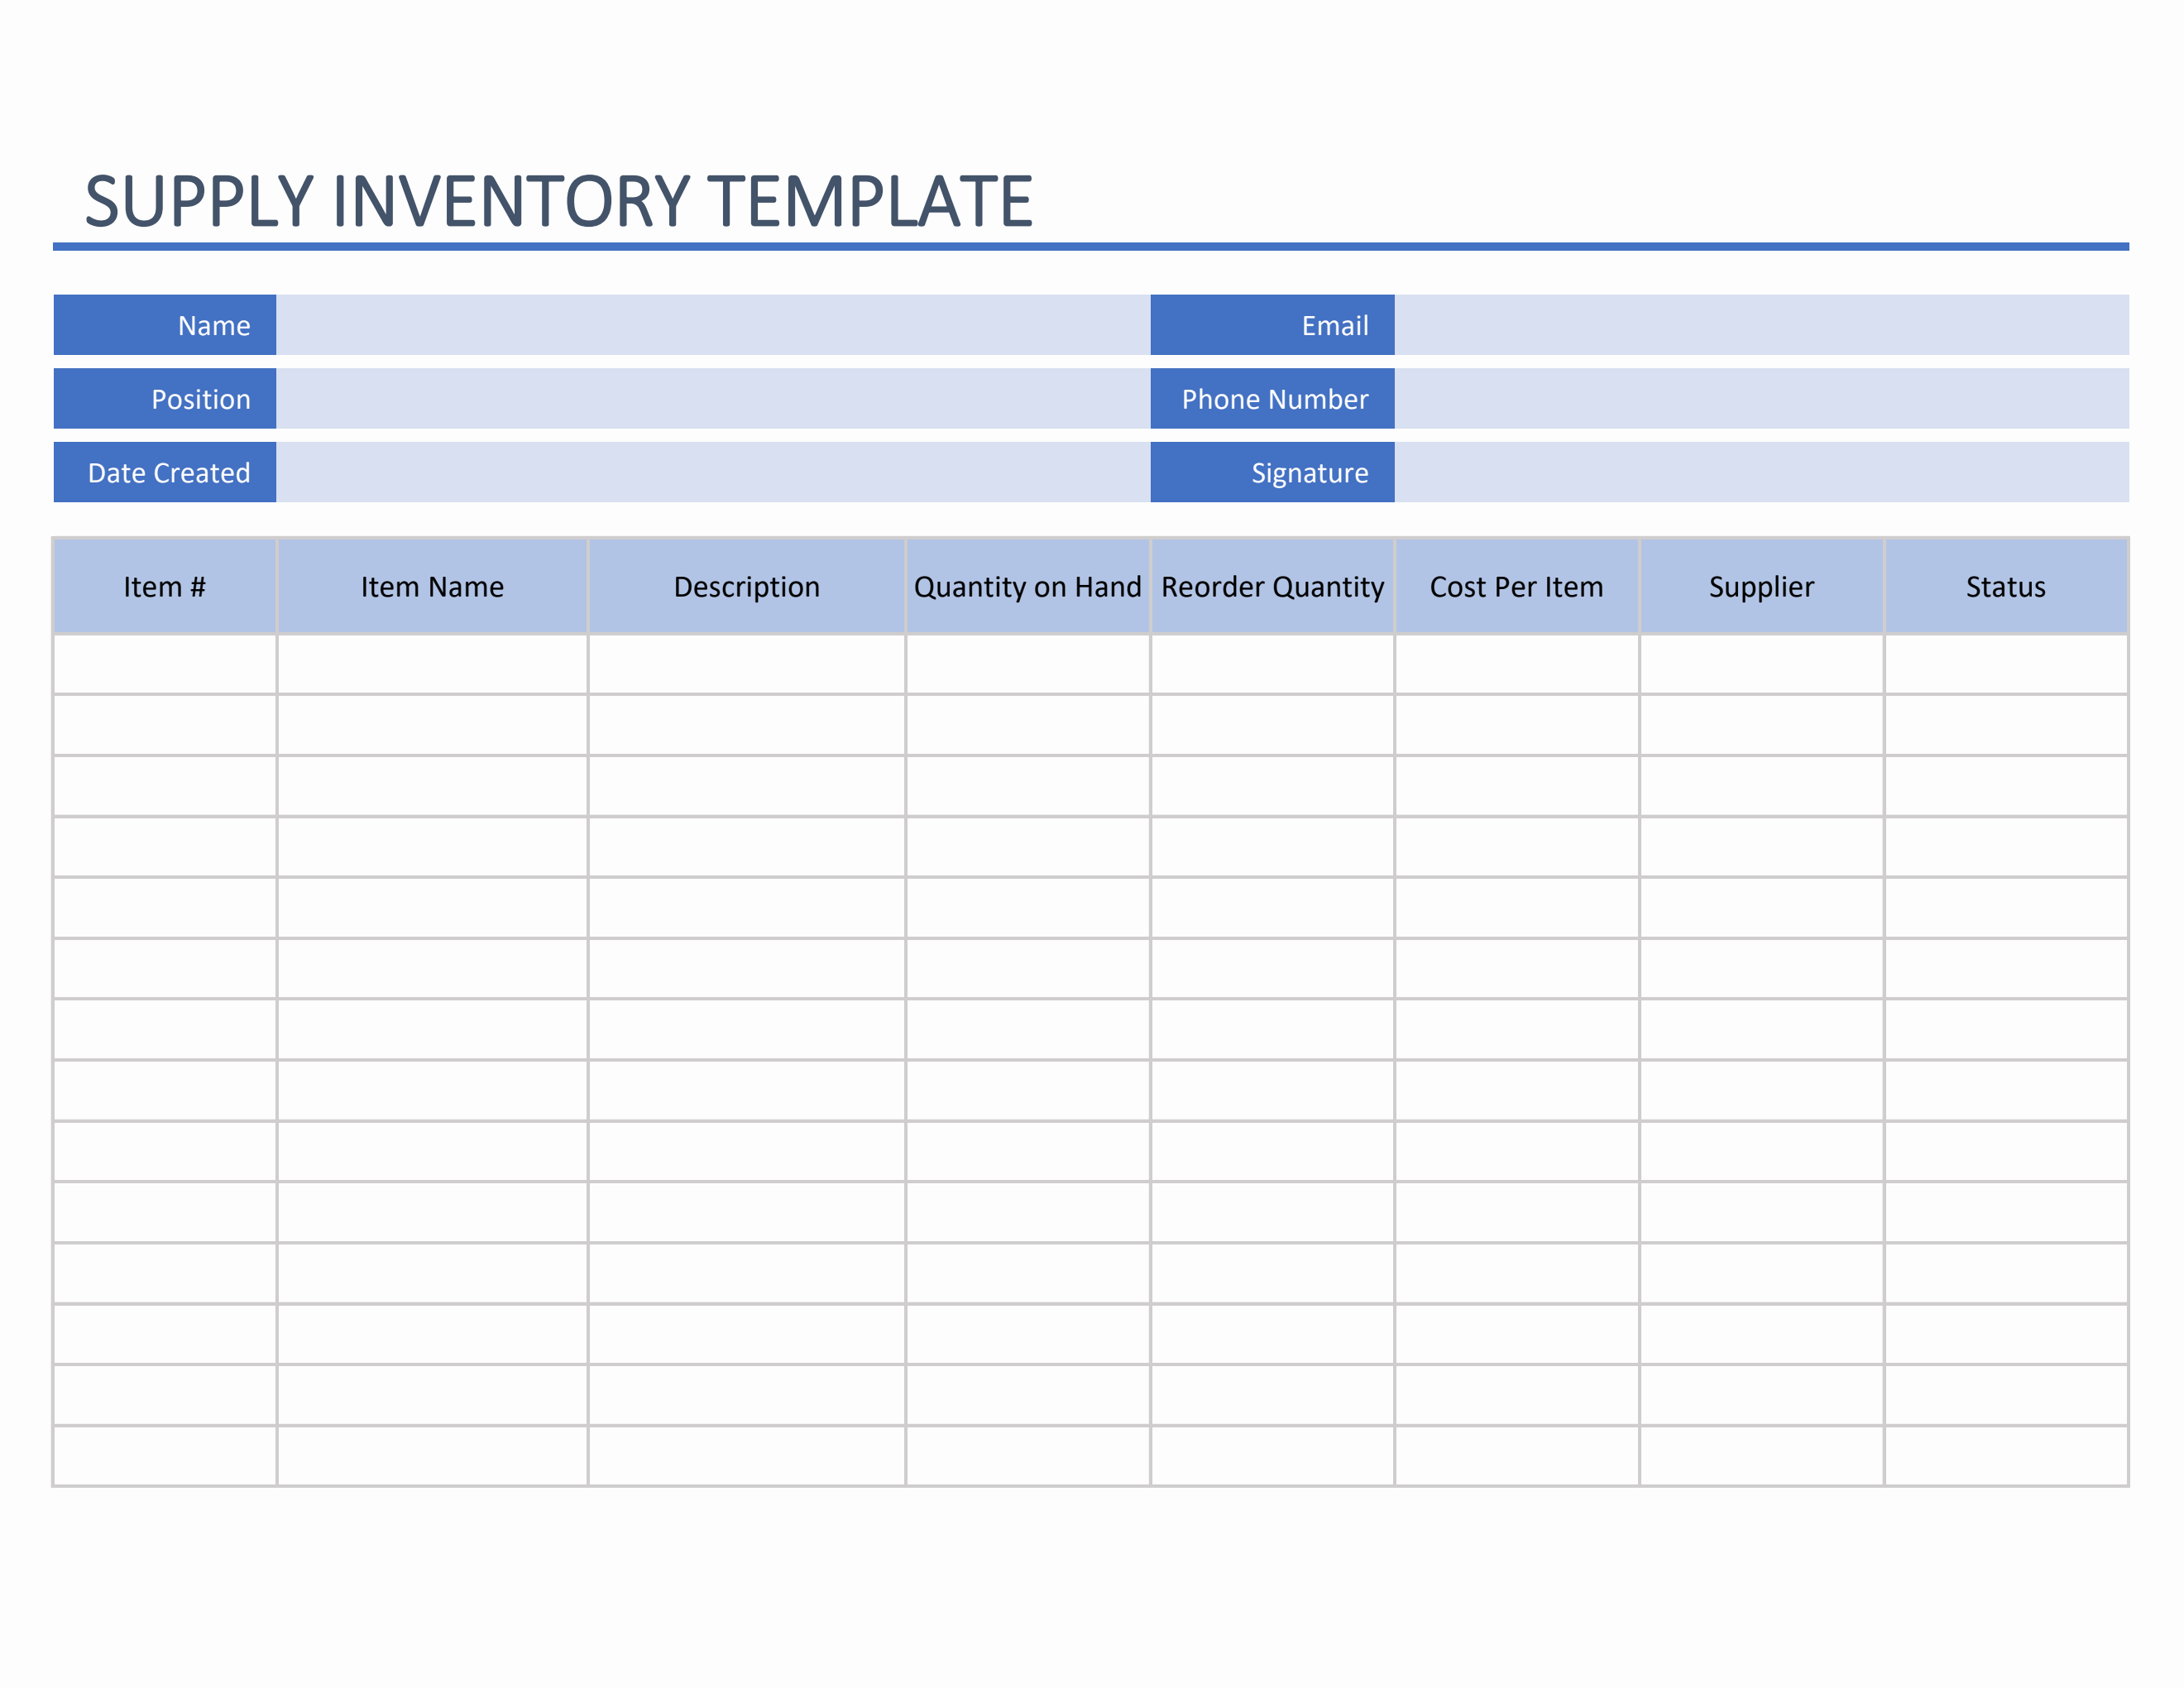 excel templates office